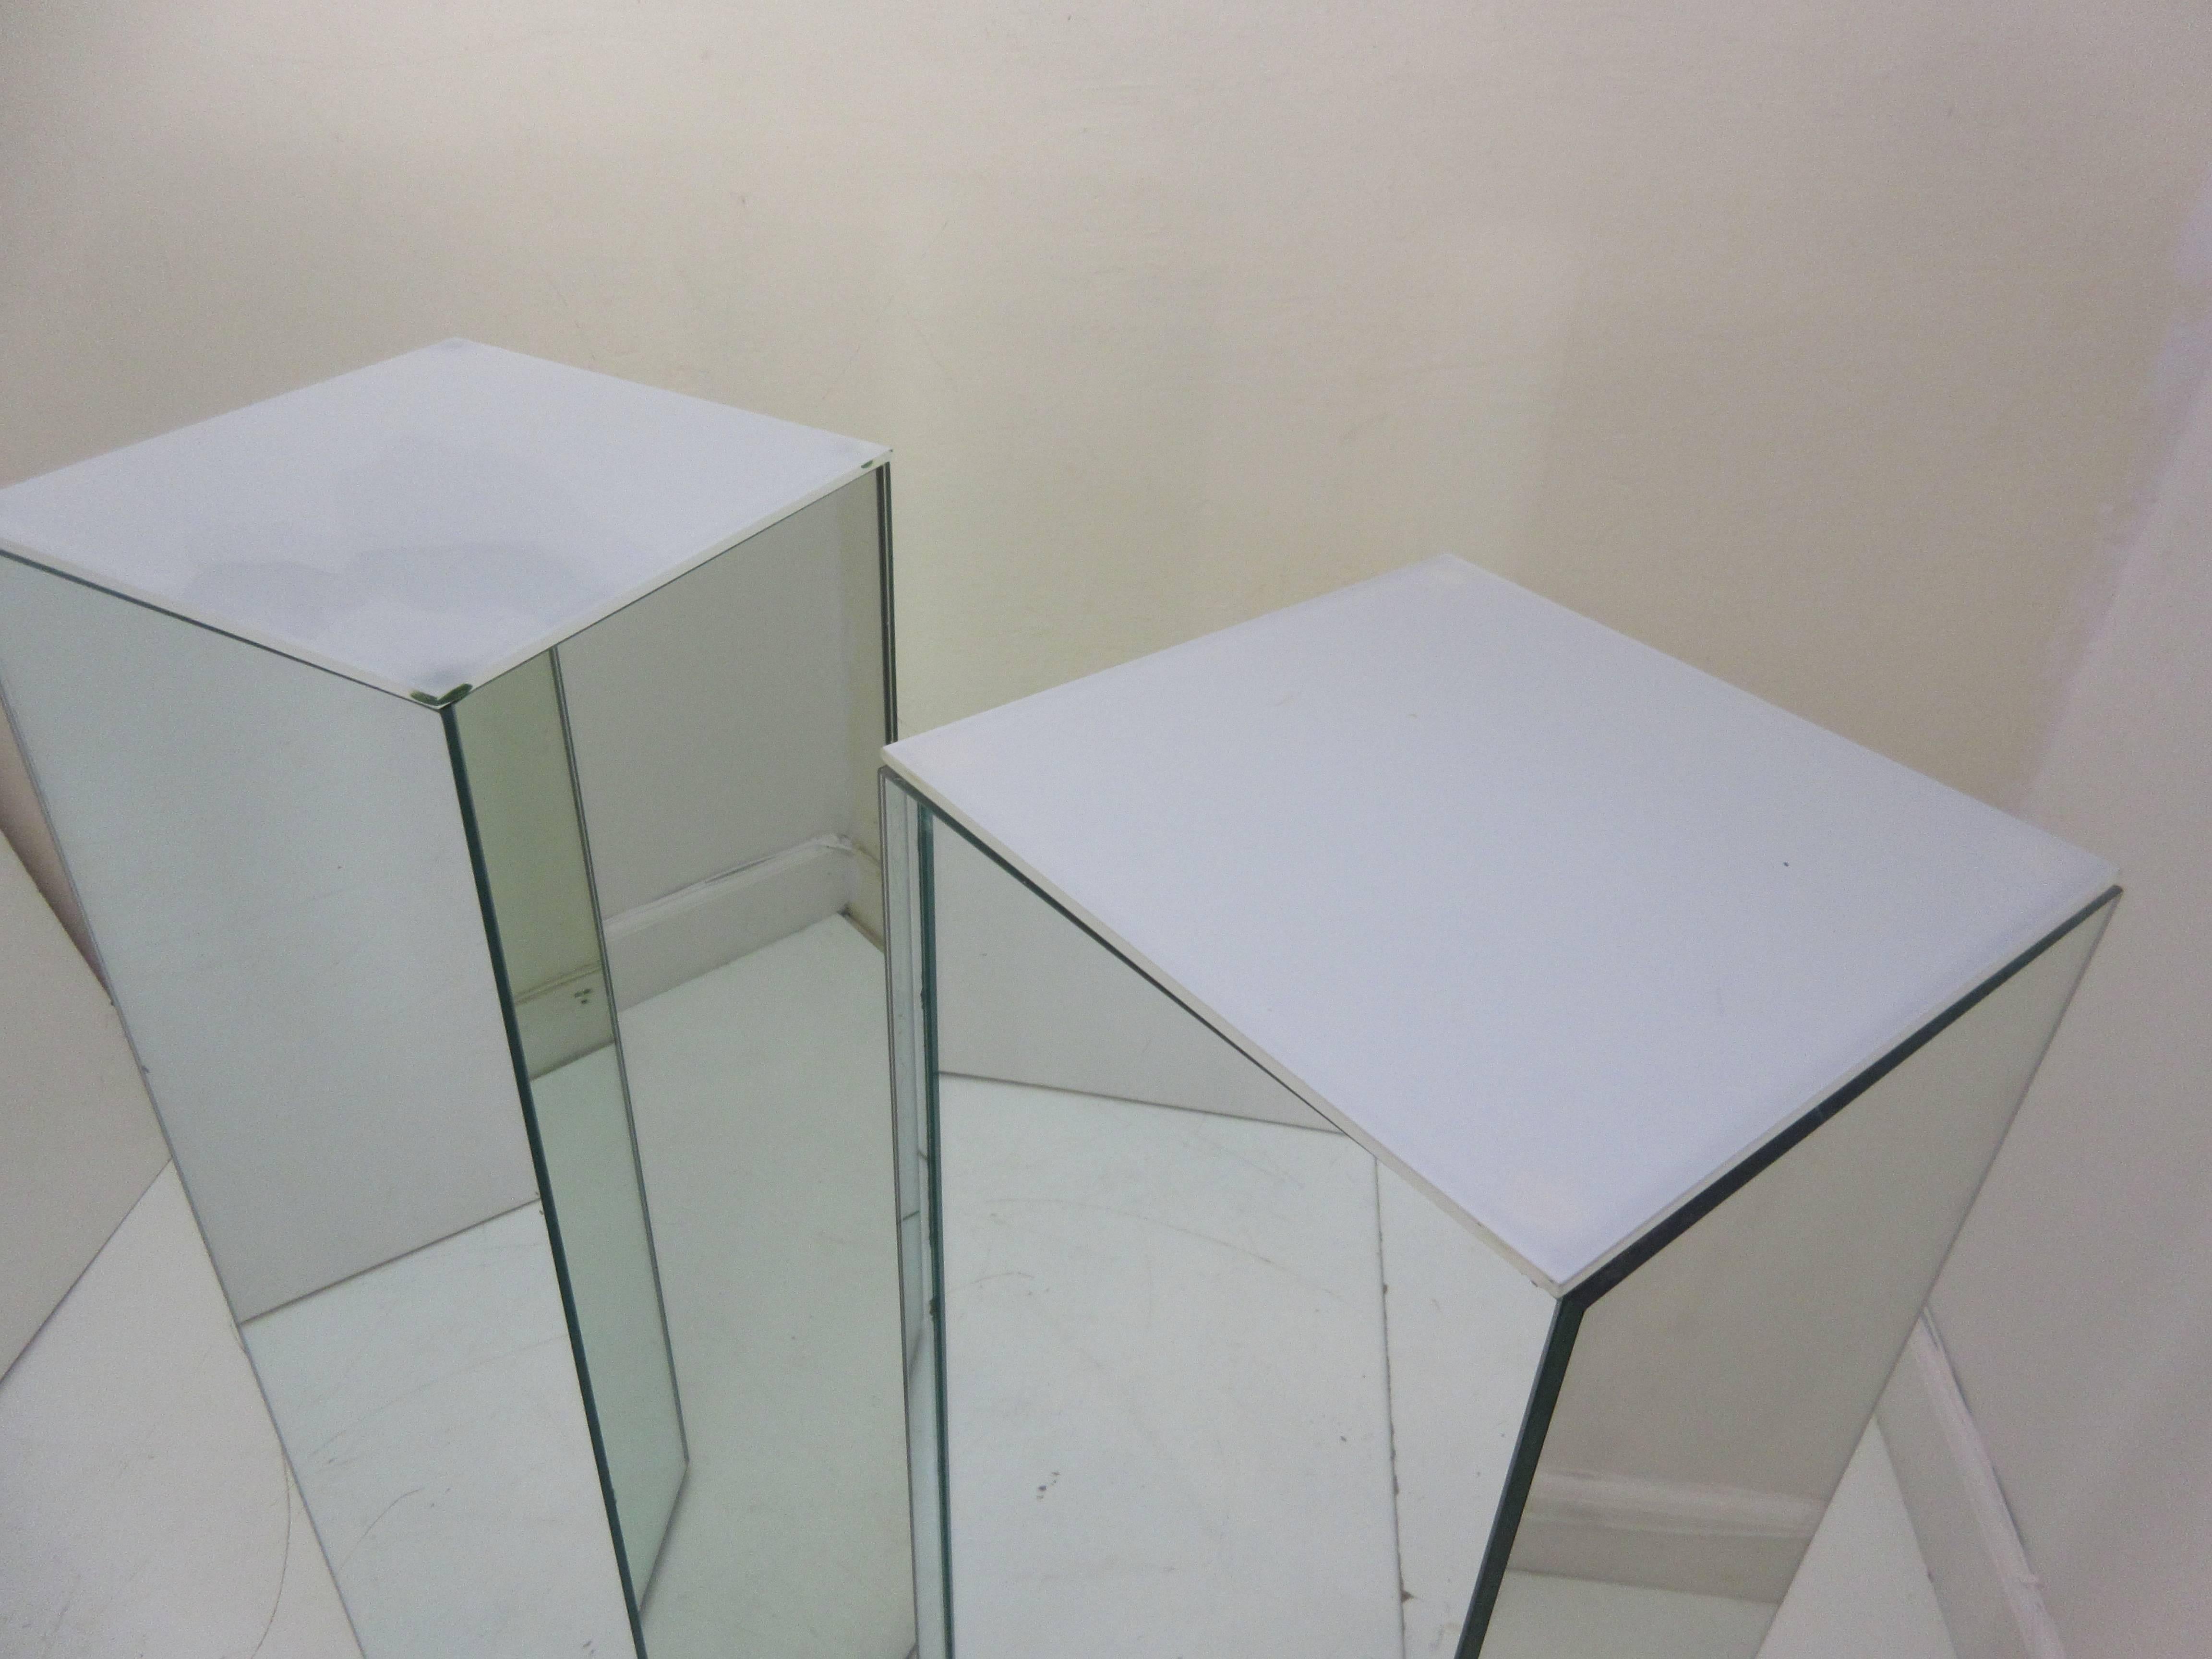 Individually priced, two available 1970s lighted pedestals. Four-sided mirrored columns with frosted tops. Switches in line allow for easy on off. Photo shows lit and unlit options.